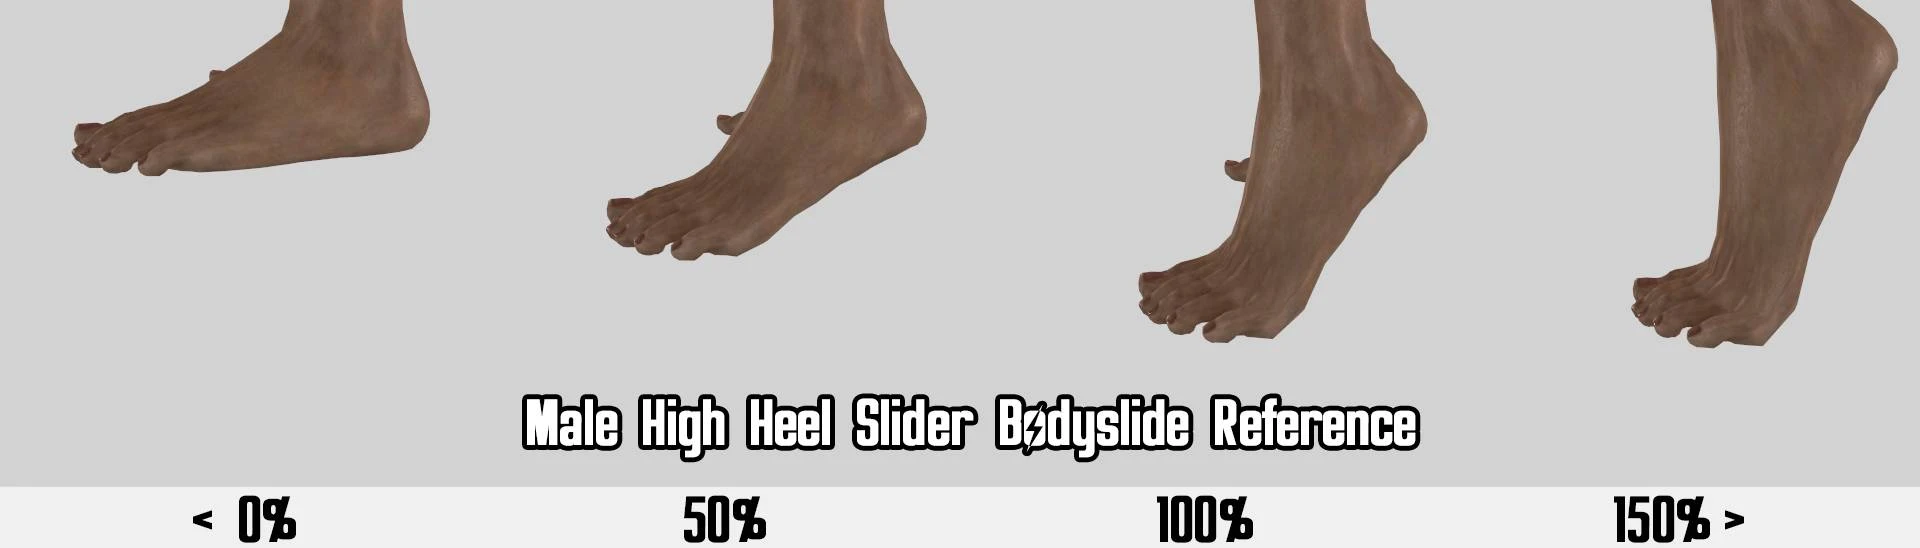 Male High Heel Slider - Bodyslide Reference at Fallout 4 Nexus - Mods and  community